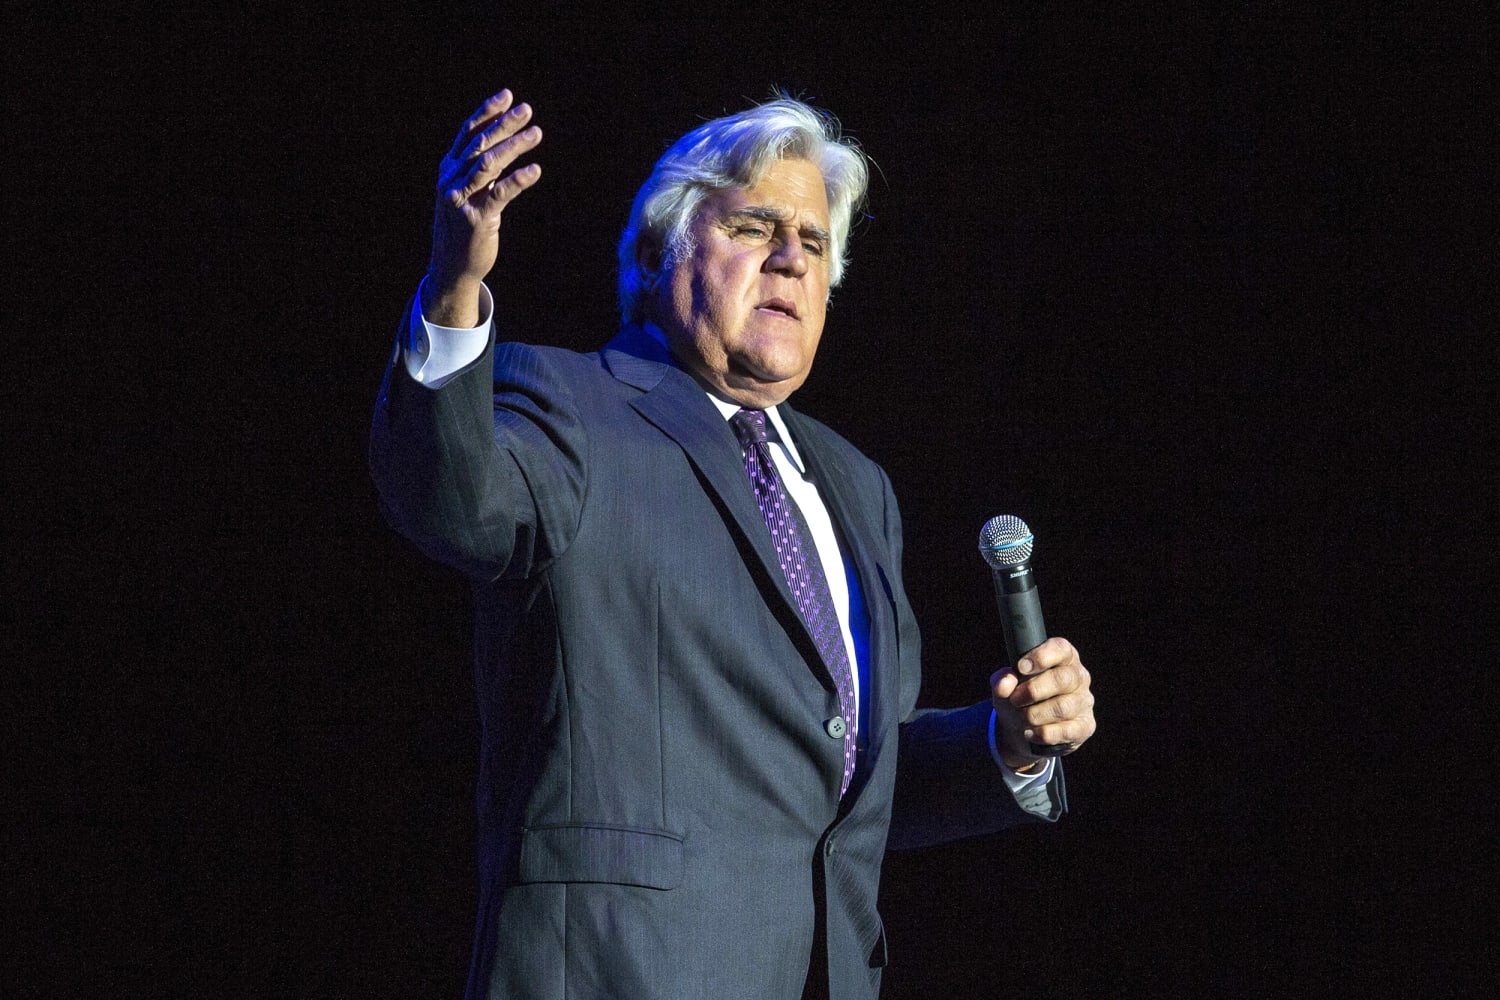 Jay Leno’s doctor hopes he will be released soon from hospital after garage fire